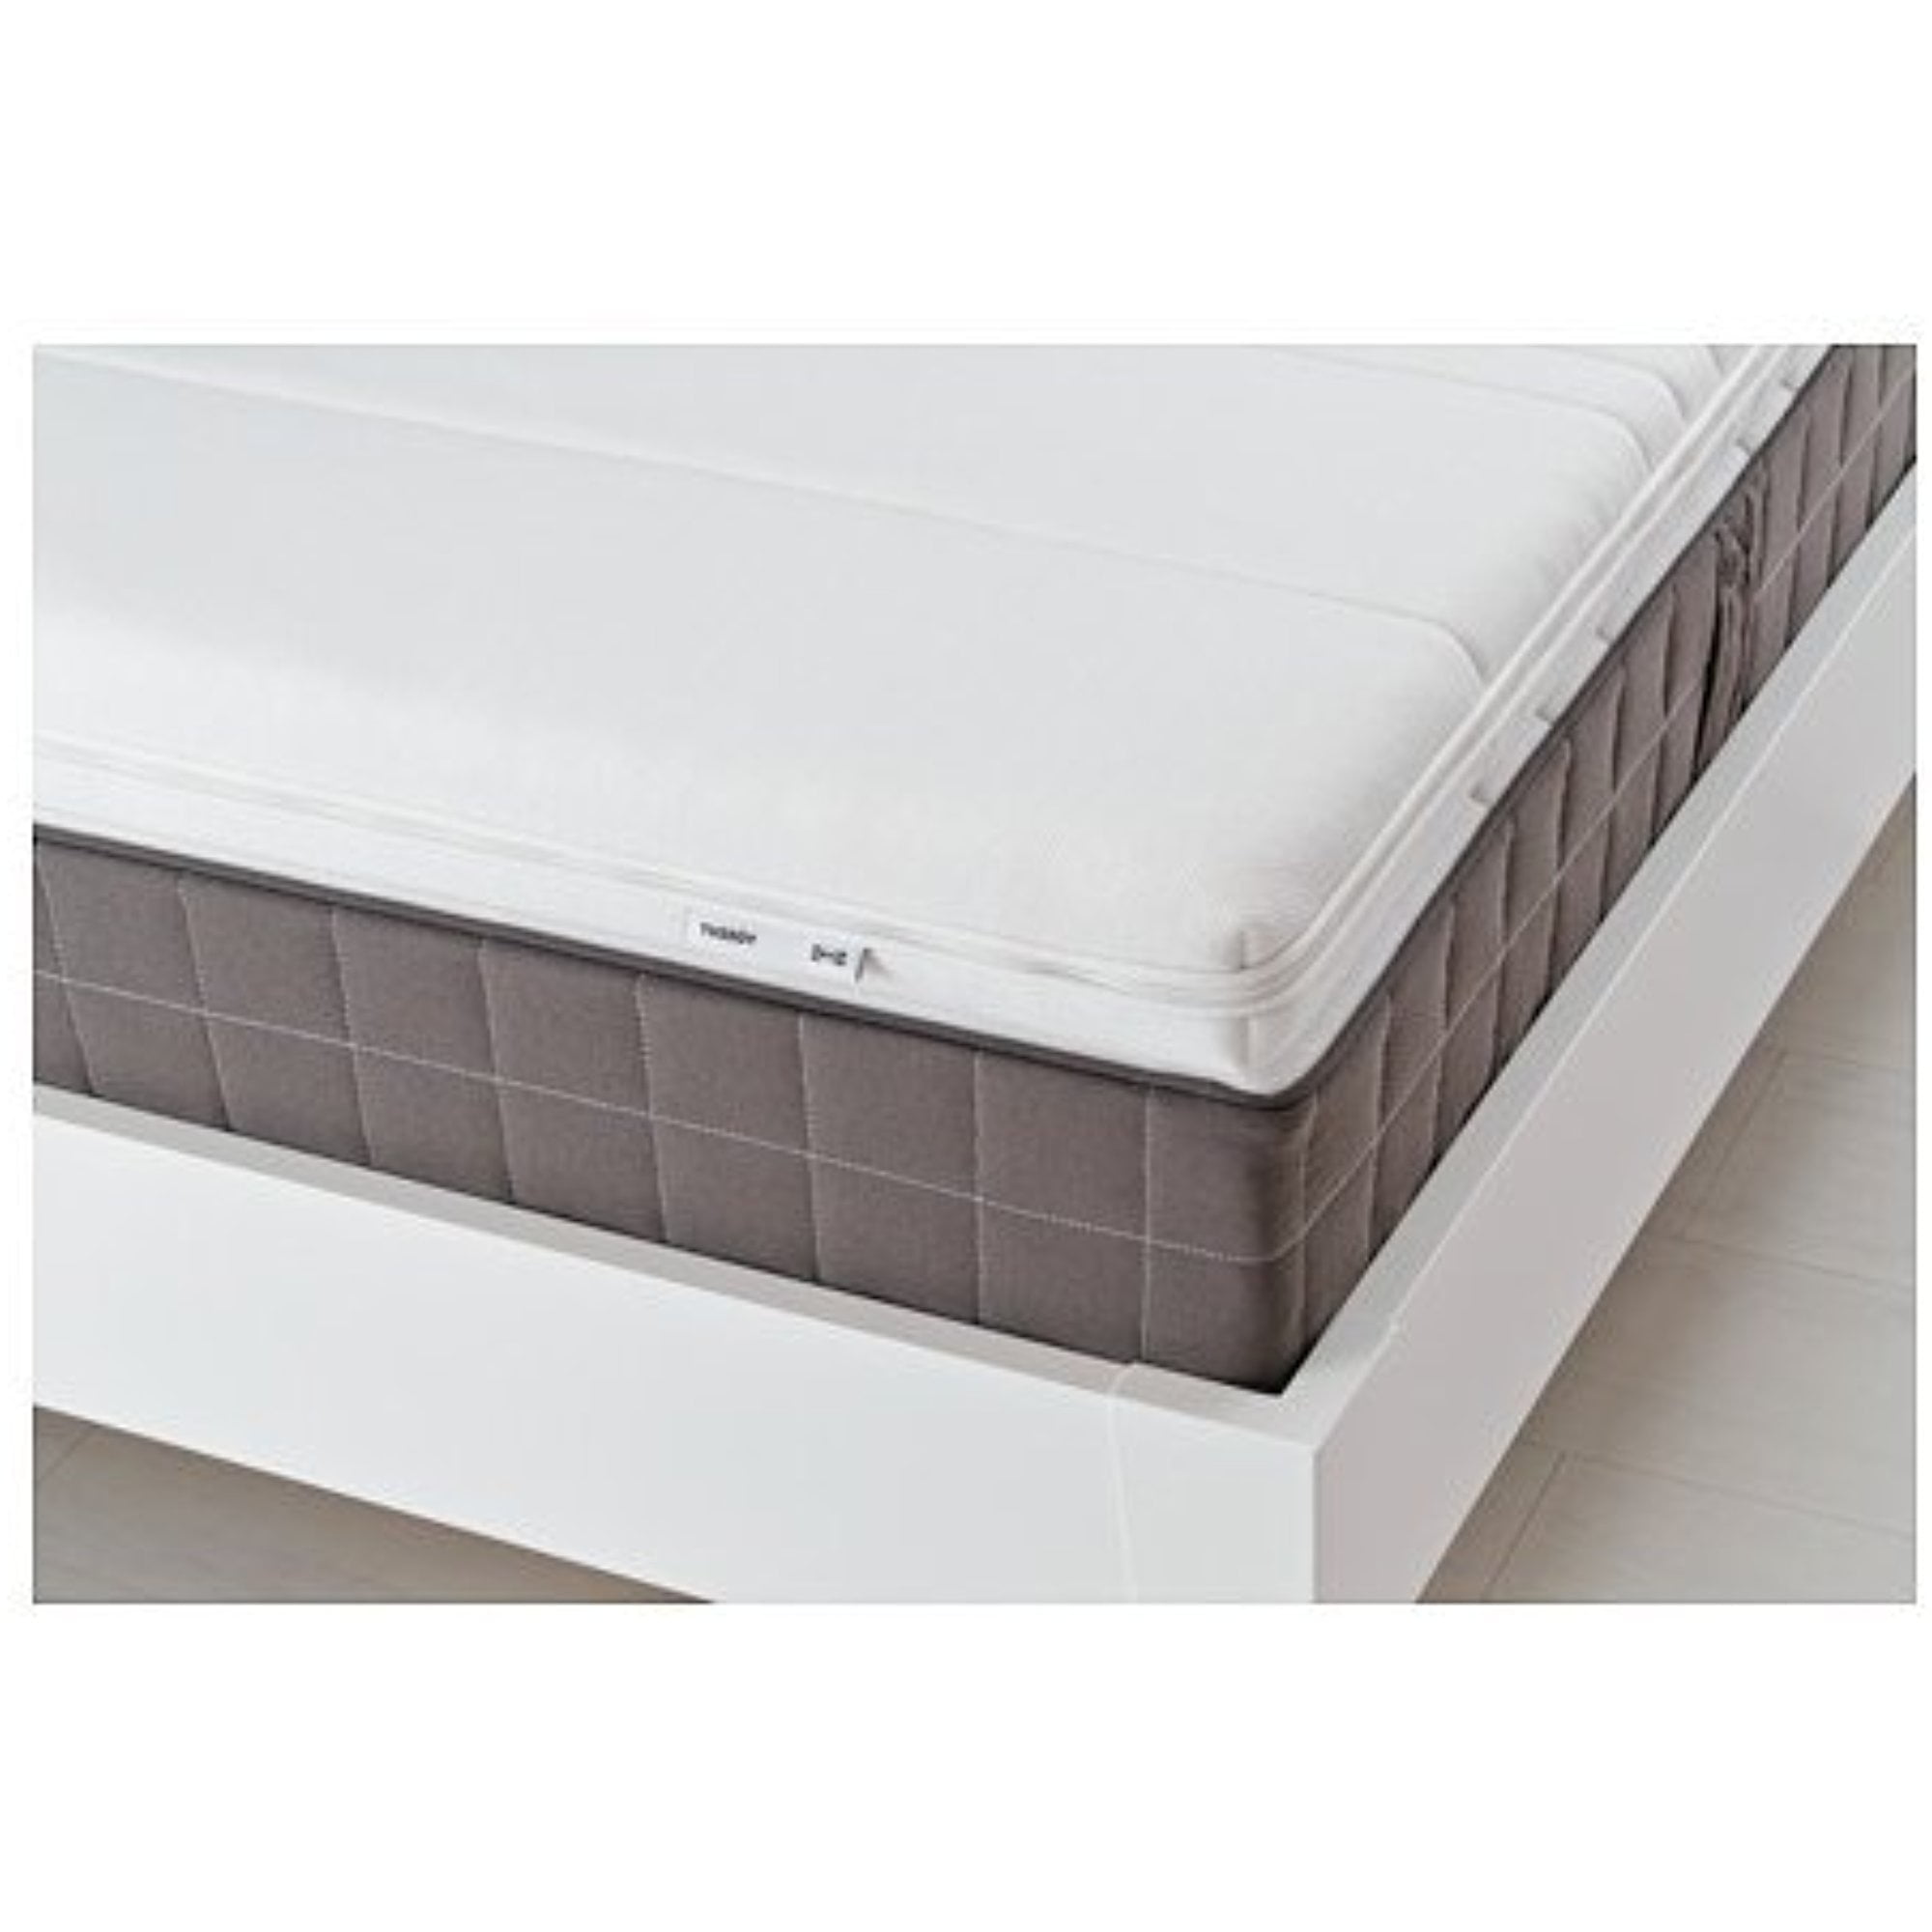 4FT6 IKEA SIZES WITH COOLMAX COVER 100% MEMORY FOAM MATTRESS TOPPER 3FT 5FT